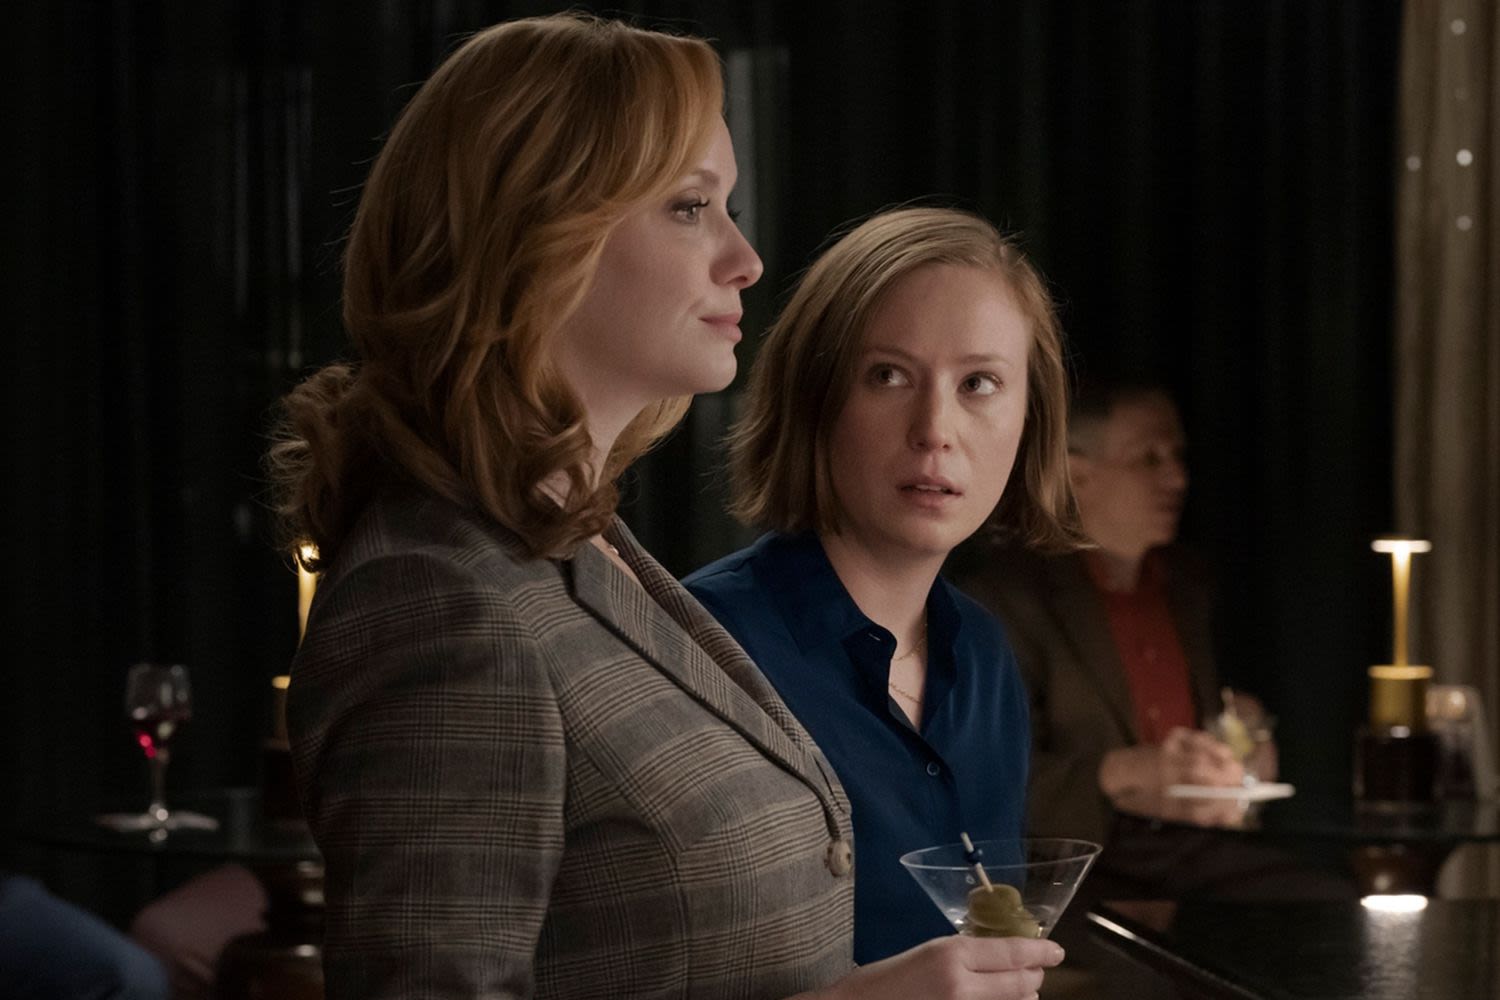 Hannah Einbinder Says Christina Hendricks Is a 'National Treasure' After Their Spicy “Hacks” Episode Together